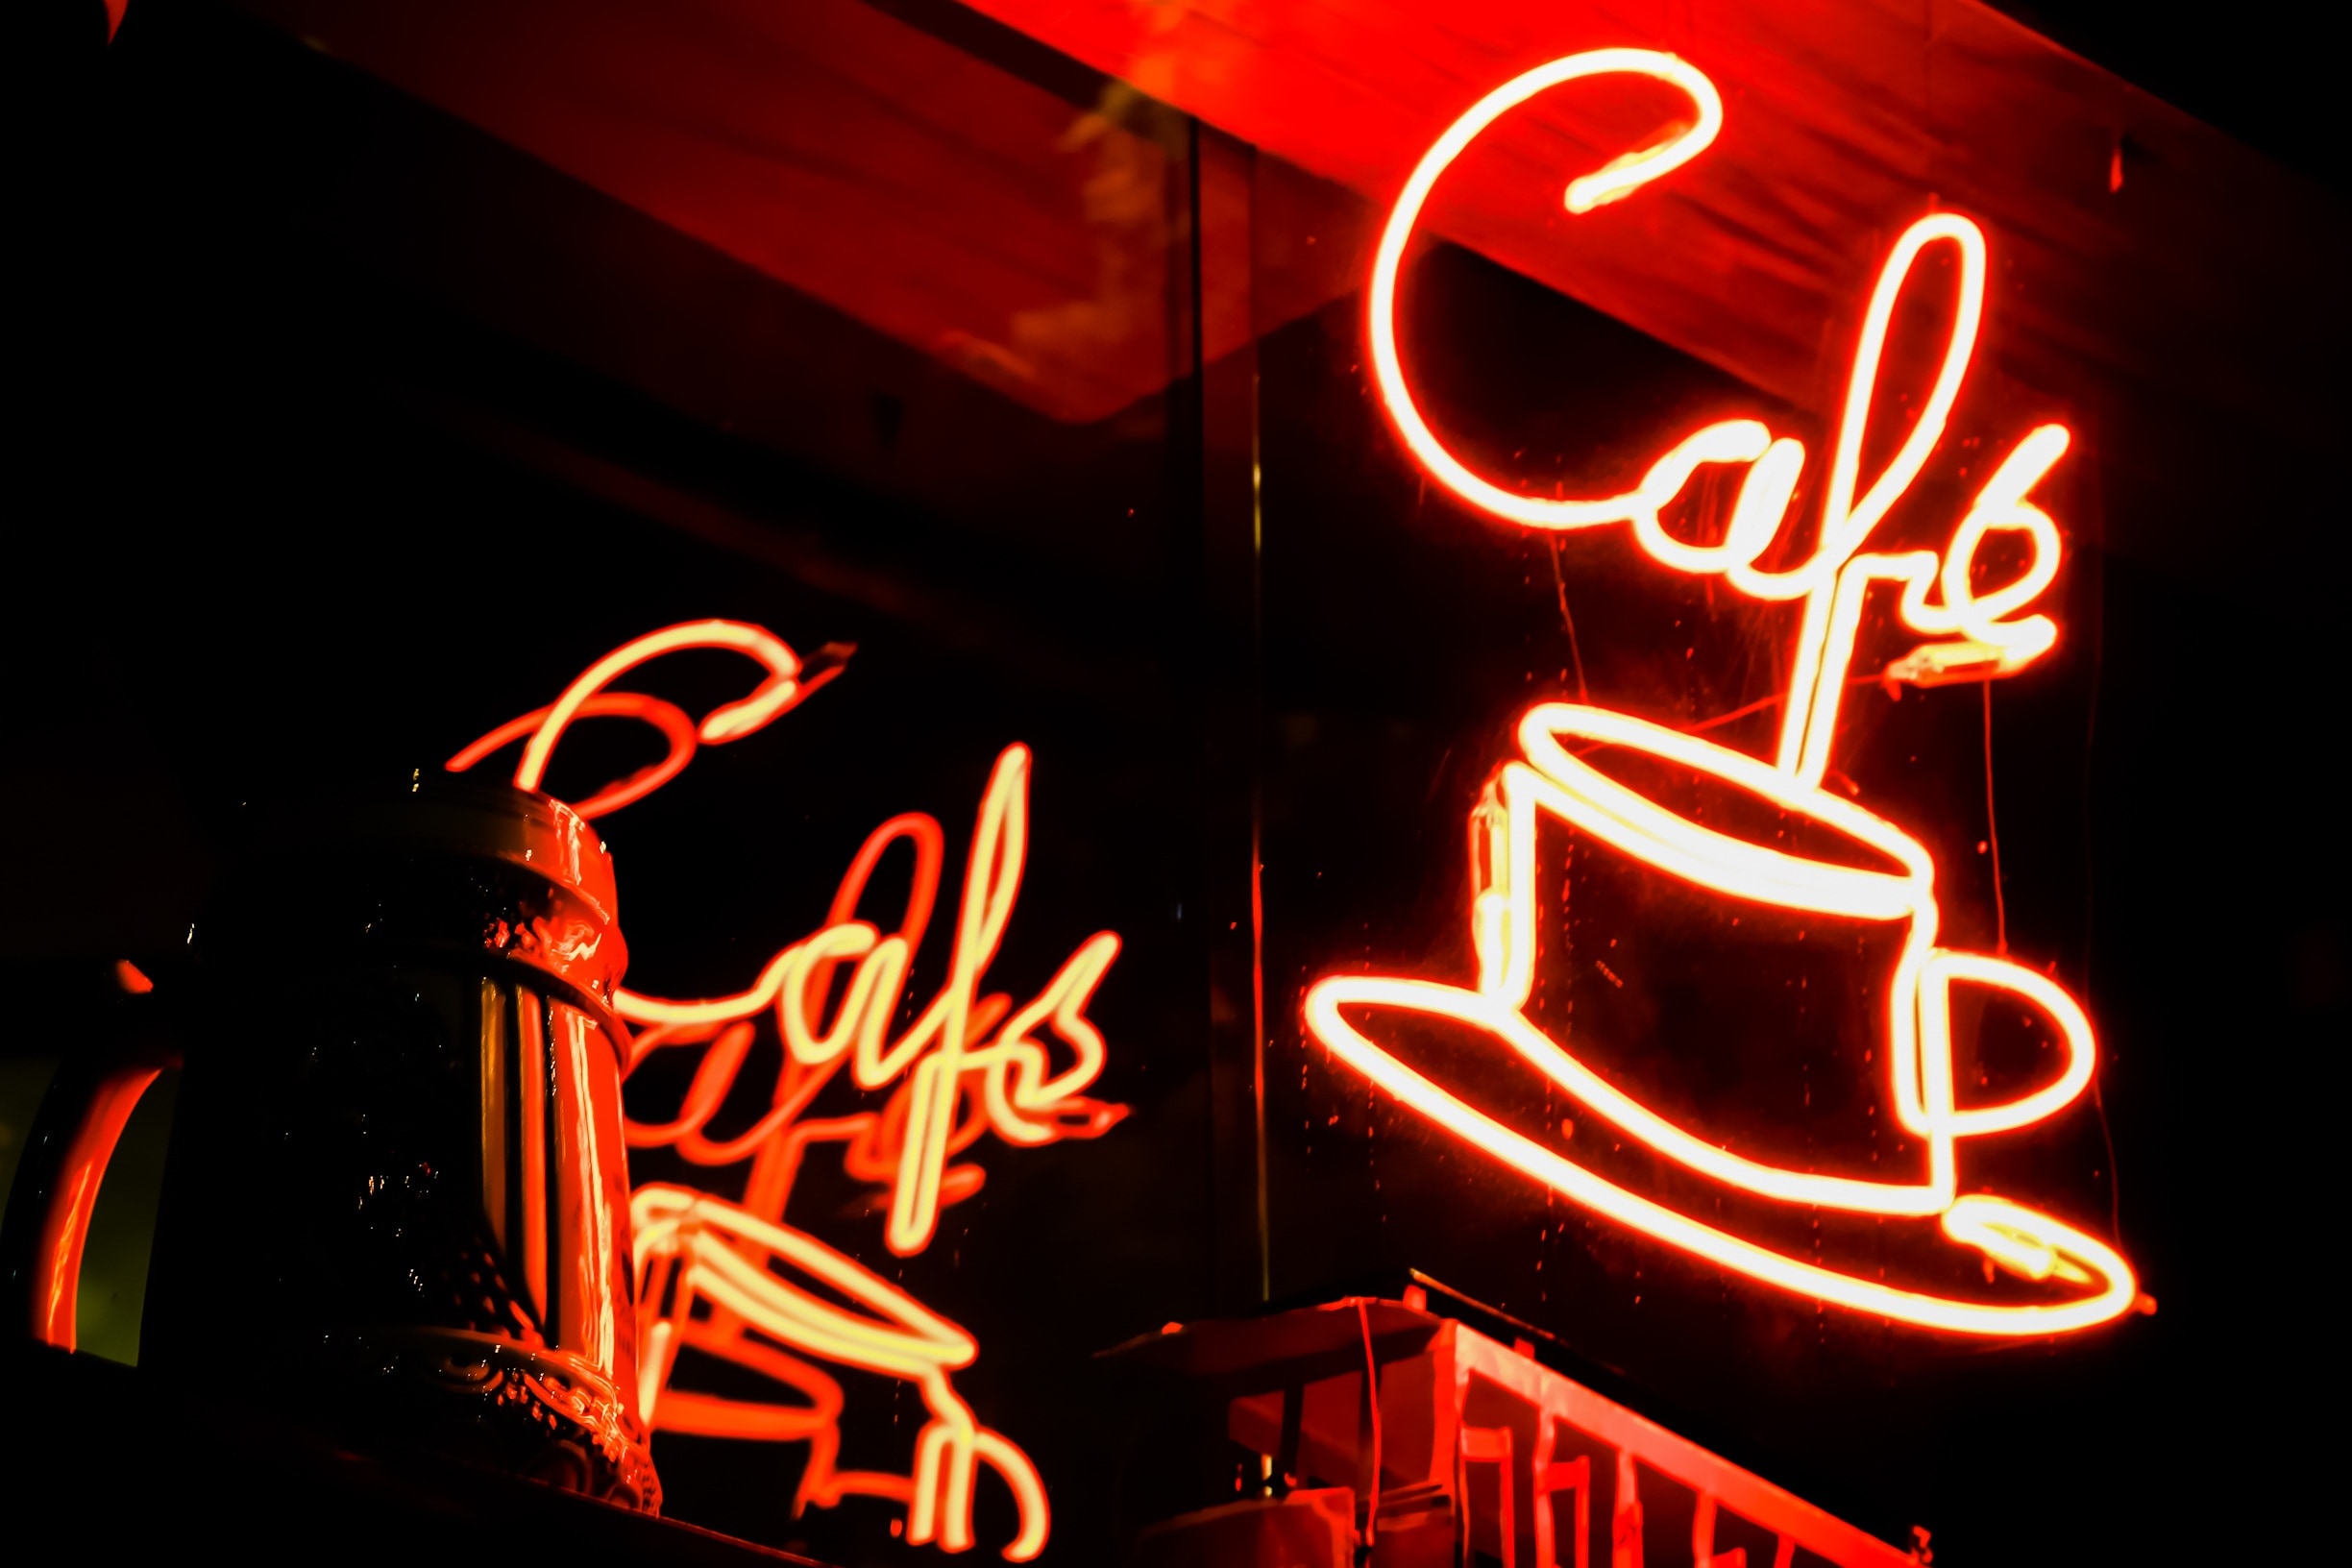 Cafe red Neon signage